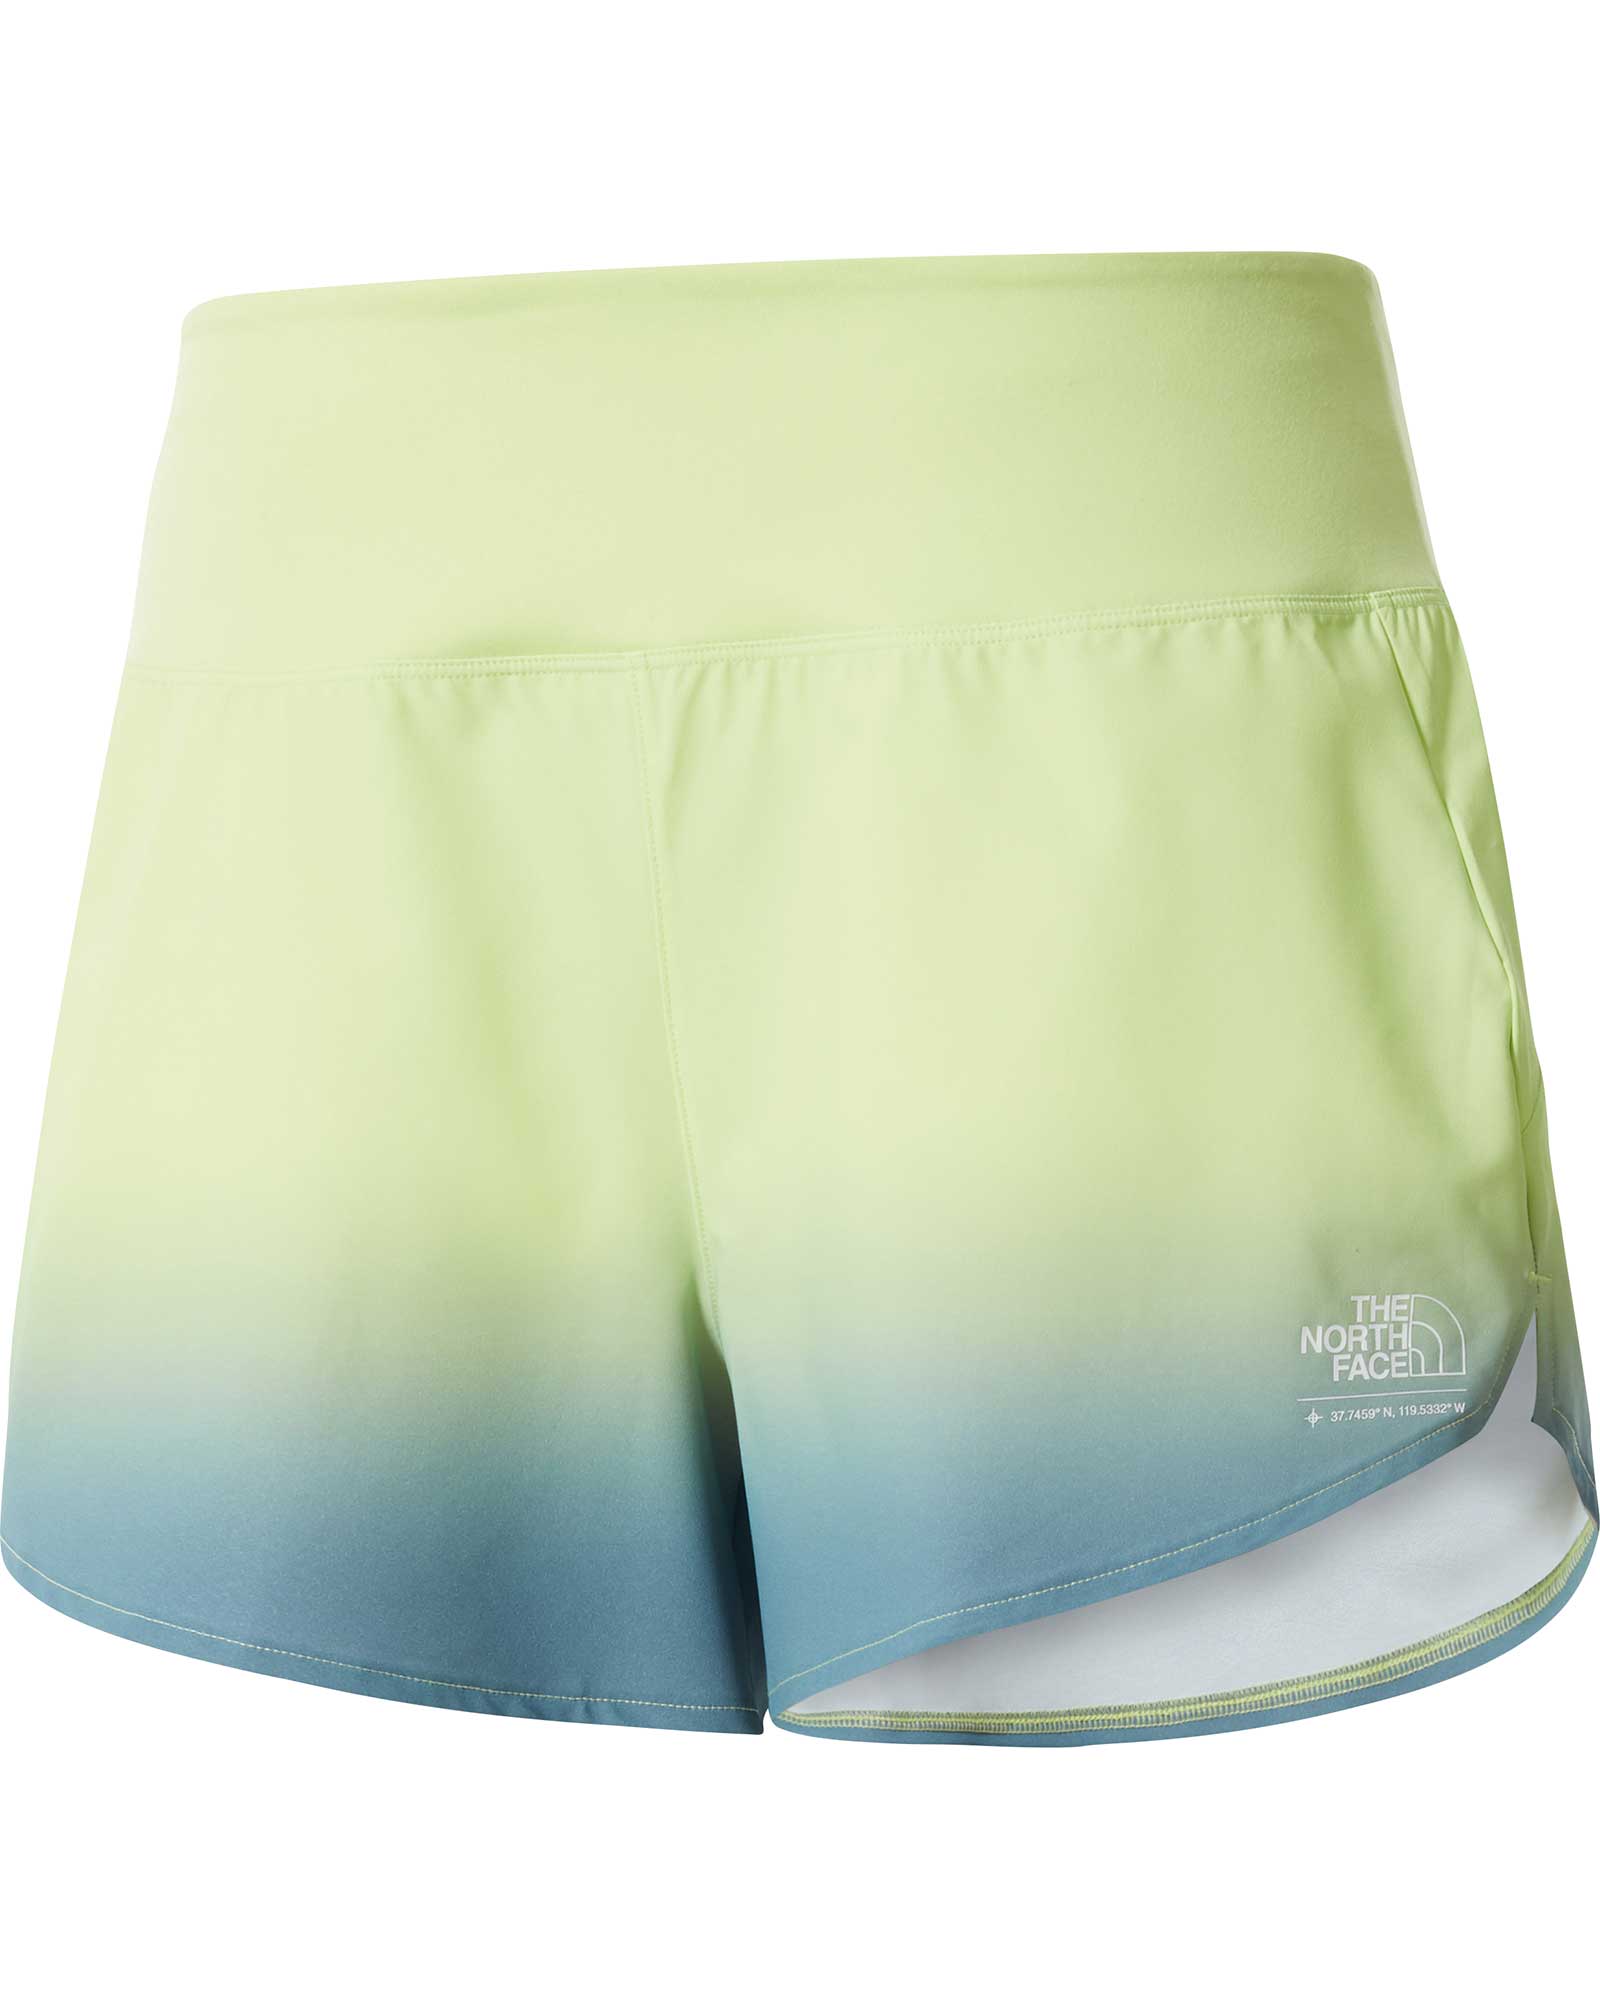 Product image of The North Face eA Arque Women's 3 Print Shorts